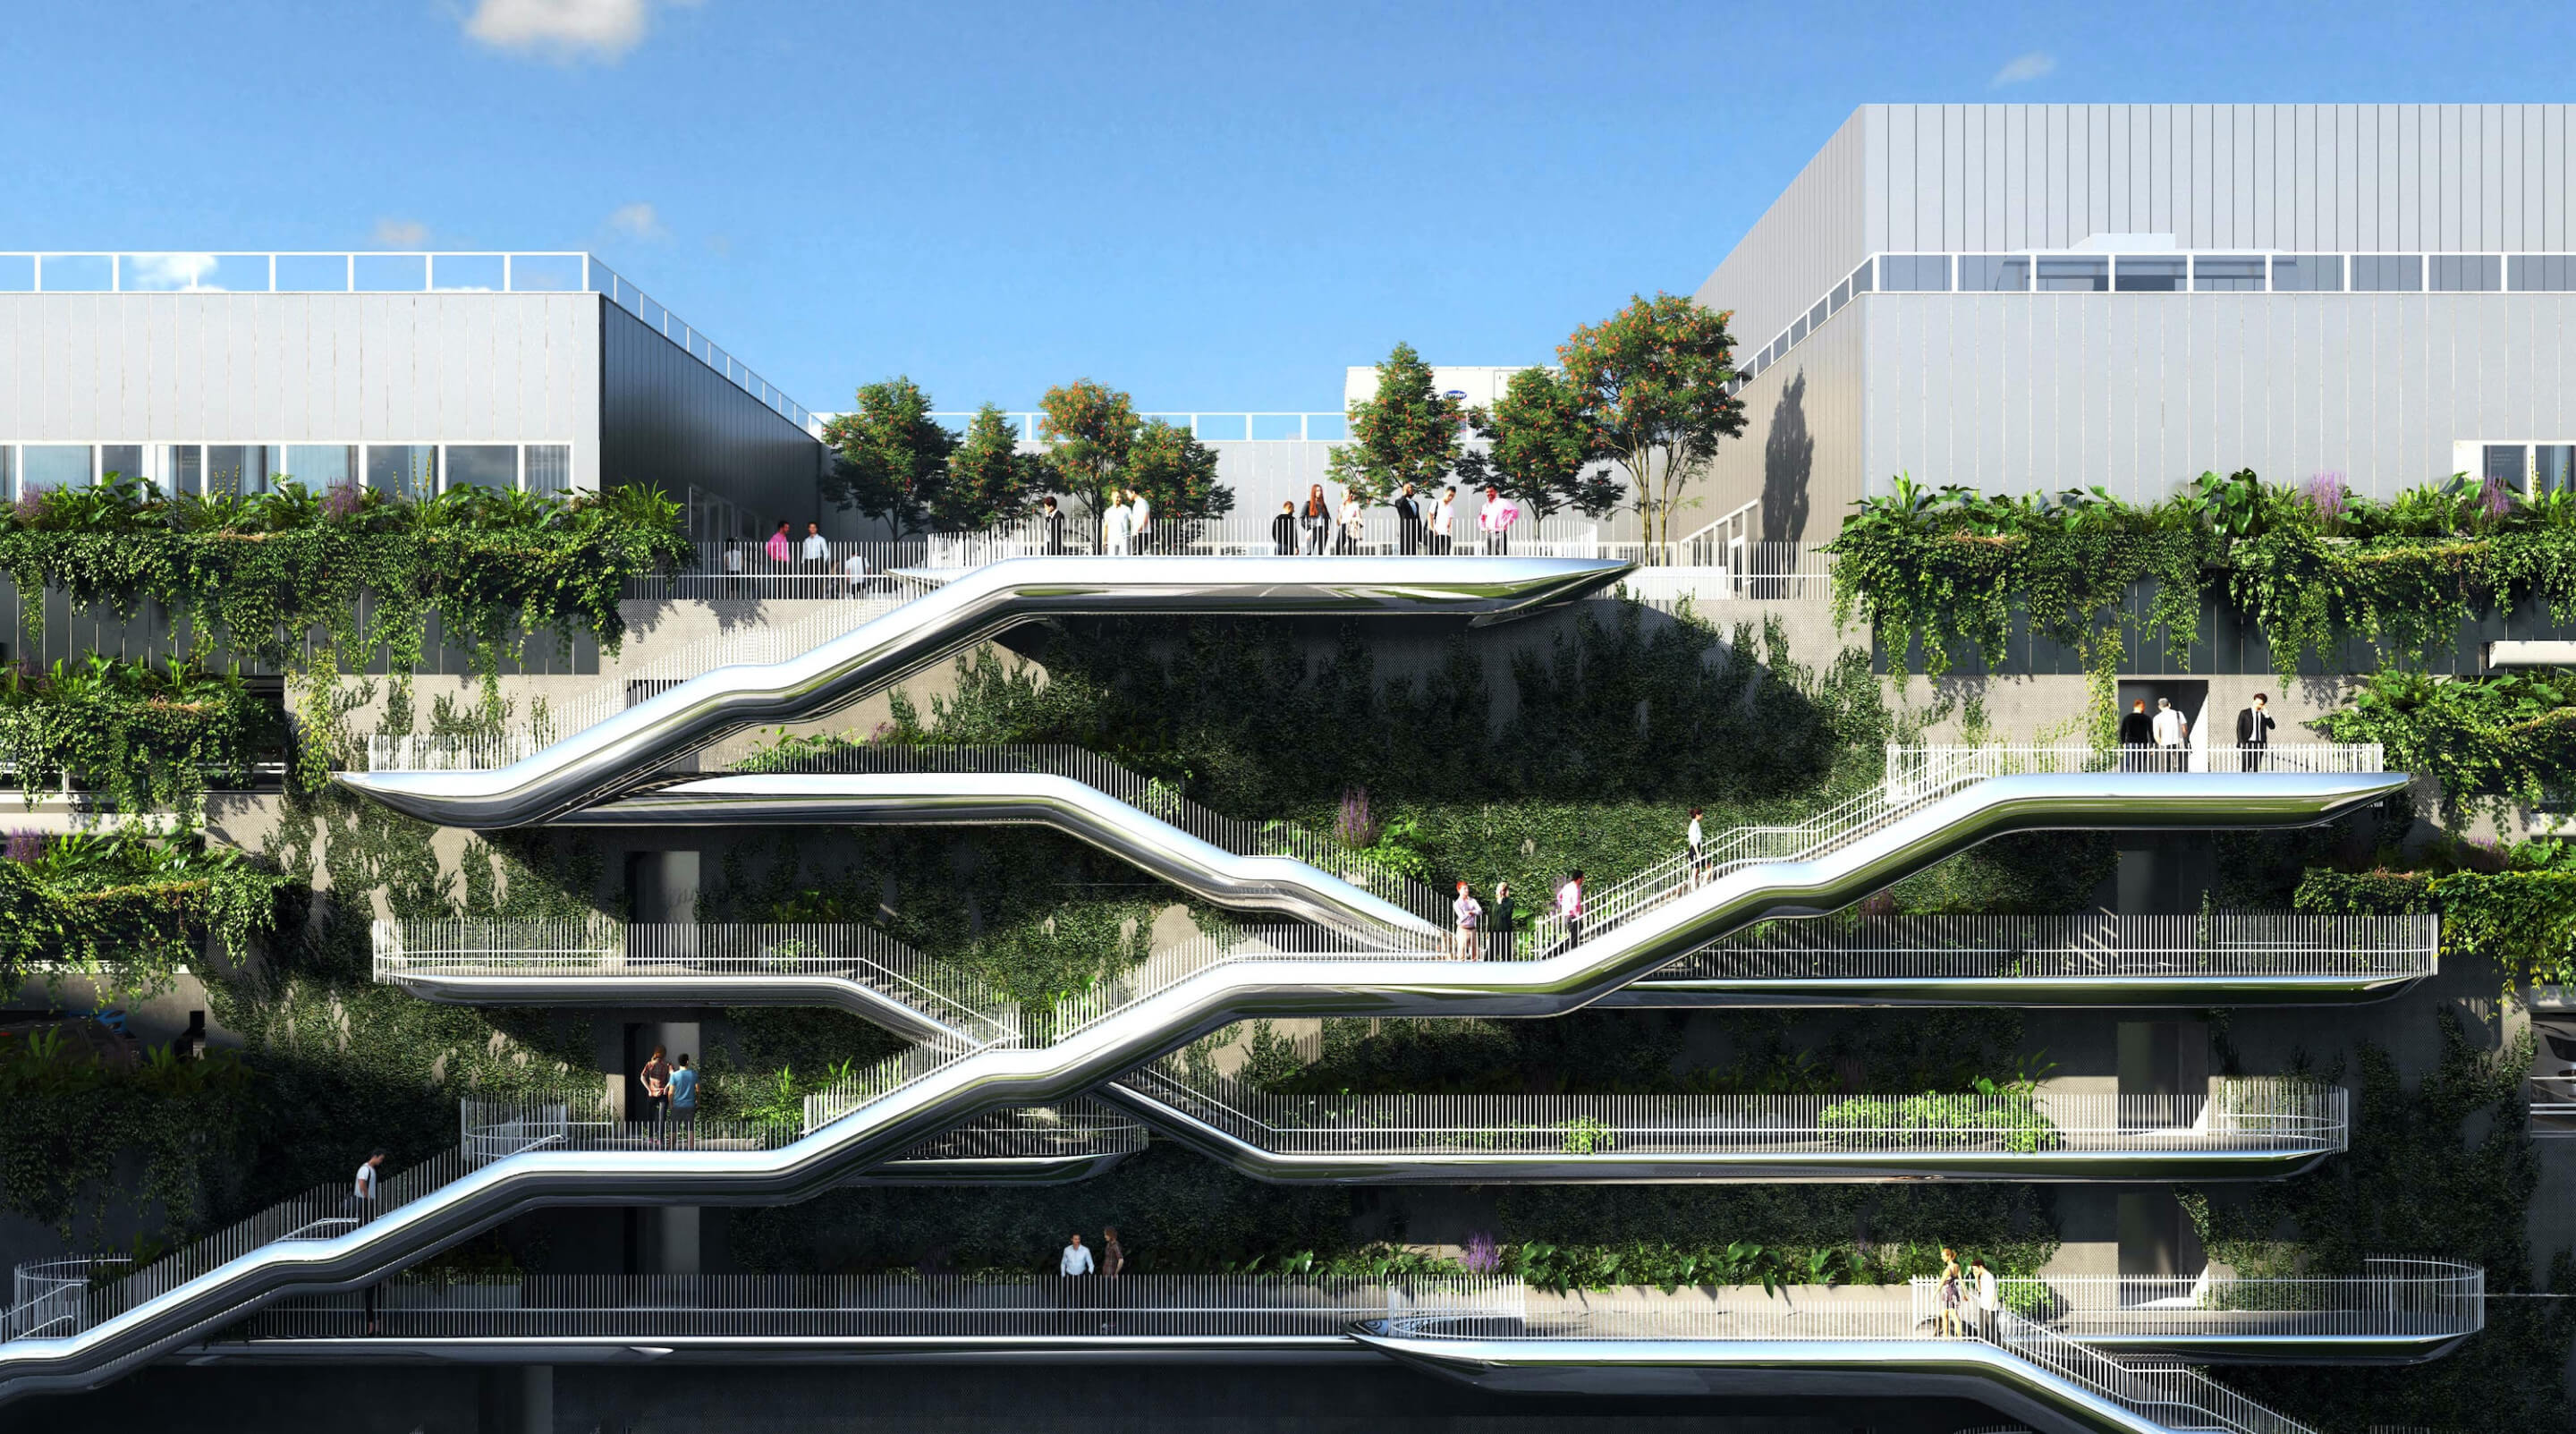 rendering of a large building covered in plants with exterior escalators